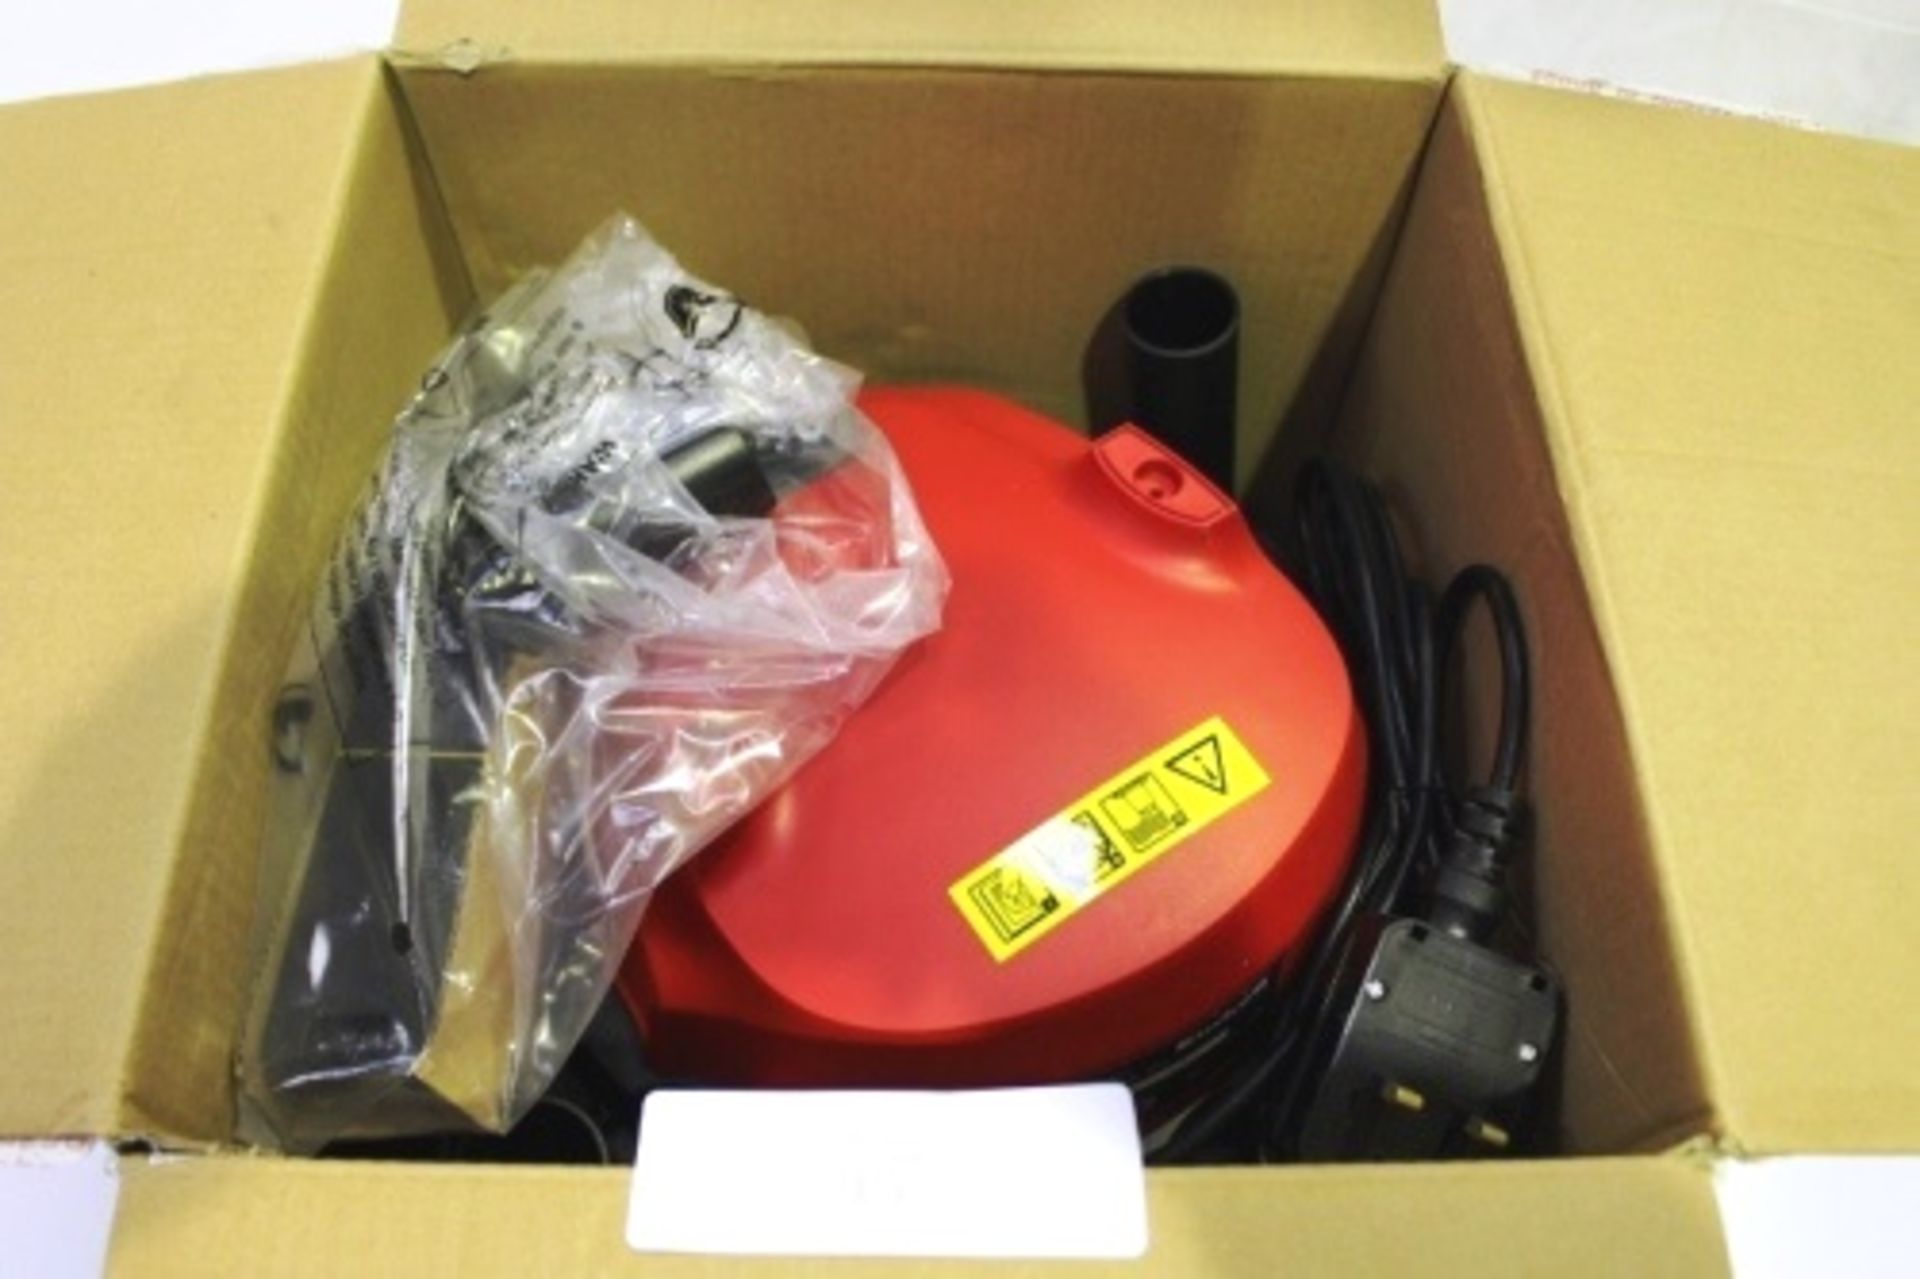 An Einhell classic wet & dry vacuum cleaner, model TC-VC1815 - new in box (ES2) - Image 3 of 3